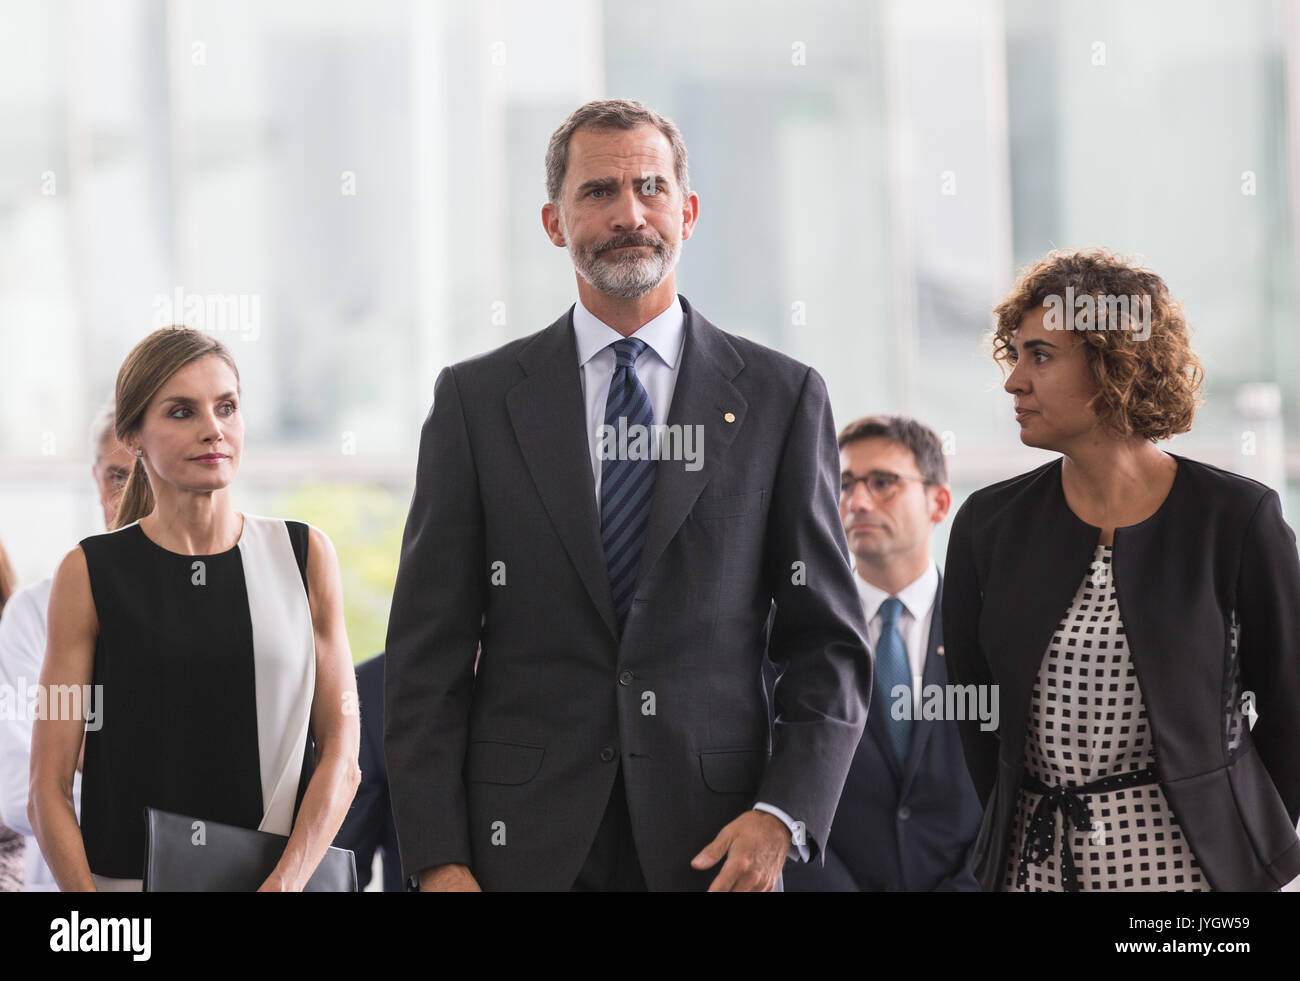 Barcelona, Spain. 19th Aug, 2017. Spain's King Felipe VI (Front C) and Queen Letizia (Front L) arrive at the Hospital del Mar to visit the victims of the terrorist attacks in Barcelona, Spain, Aug. 19, 2017. A total of 14 fatalities occurred in two terrorist attacks in the Spanish cities of Barcelona and Cambrils that also hurt about 126 people. Credit: Xu Jinquan/Xinhua/Alamy Live News Stock Photo